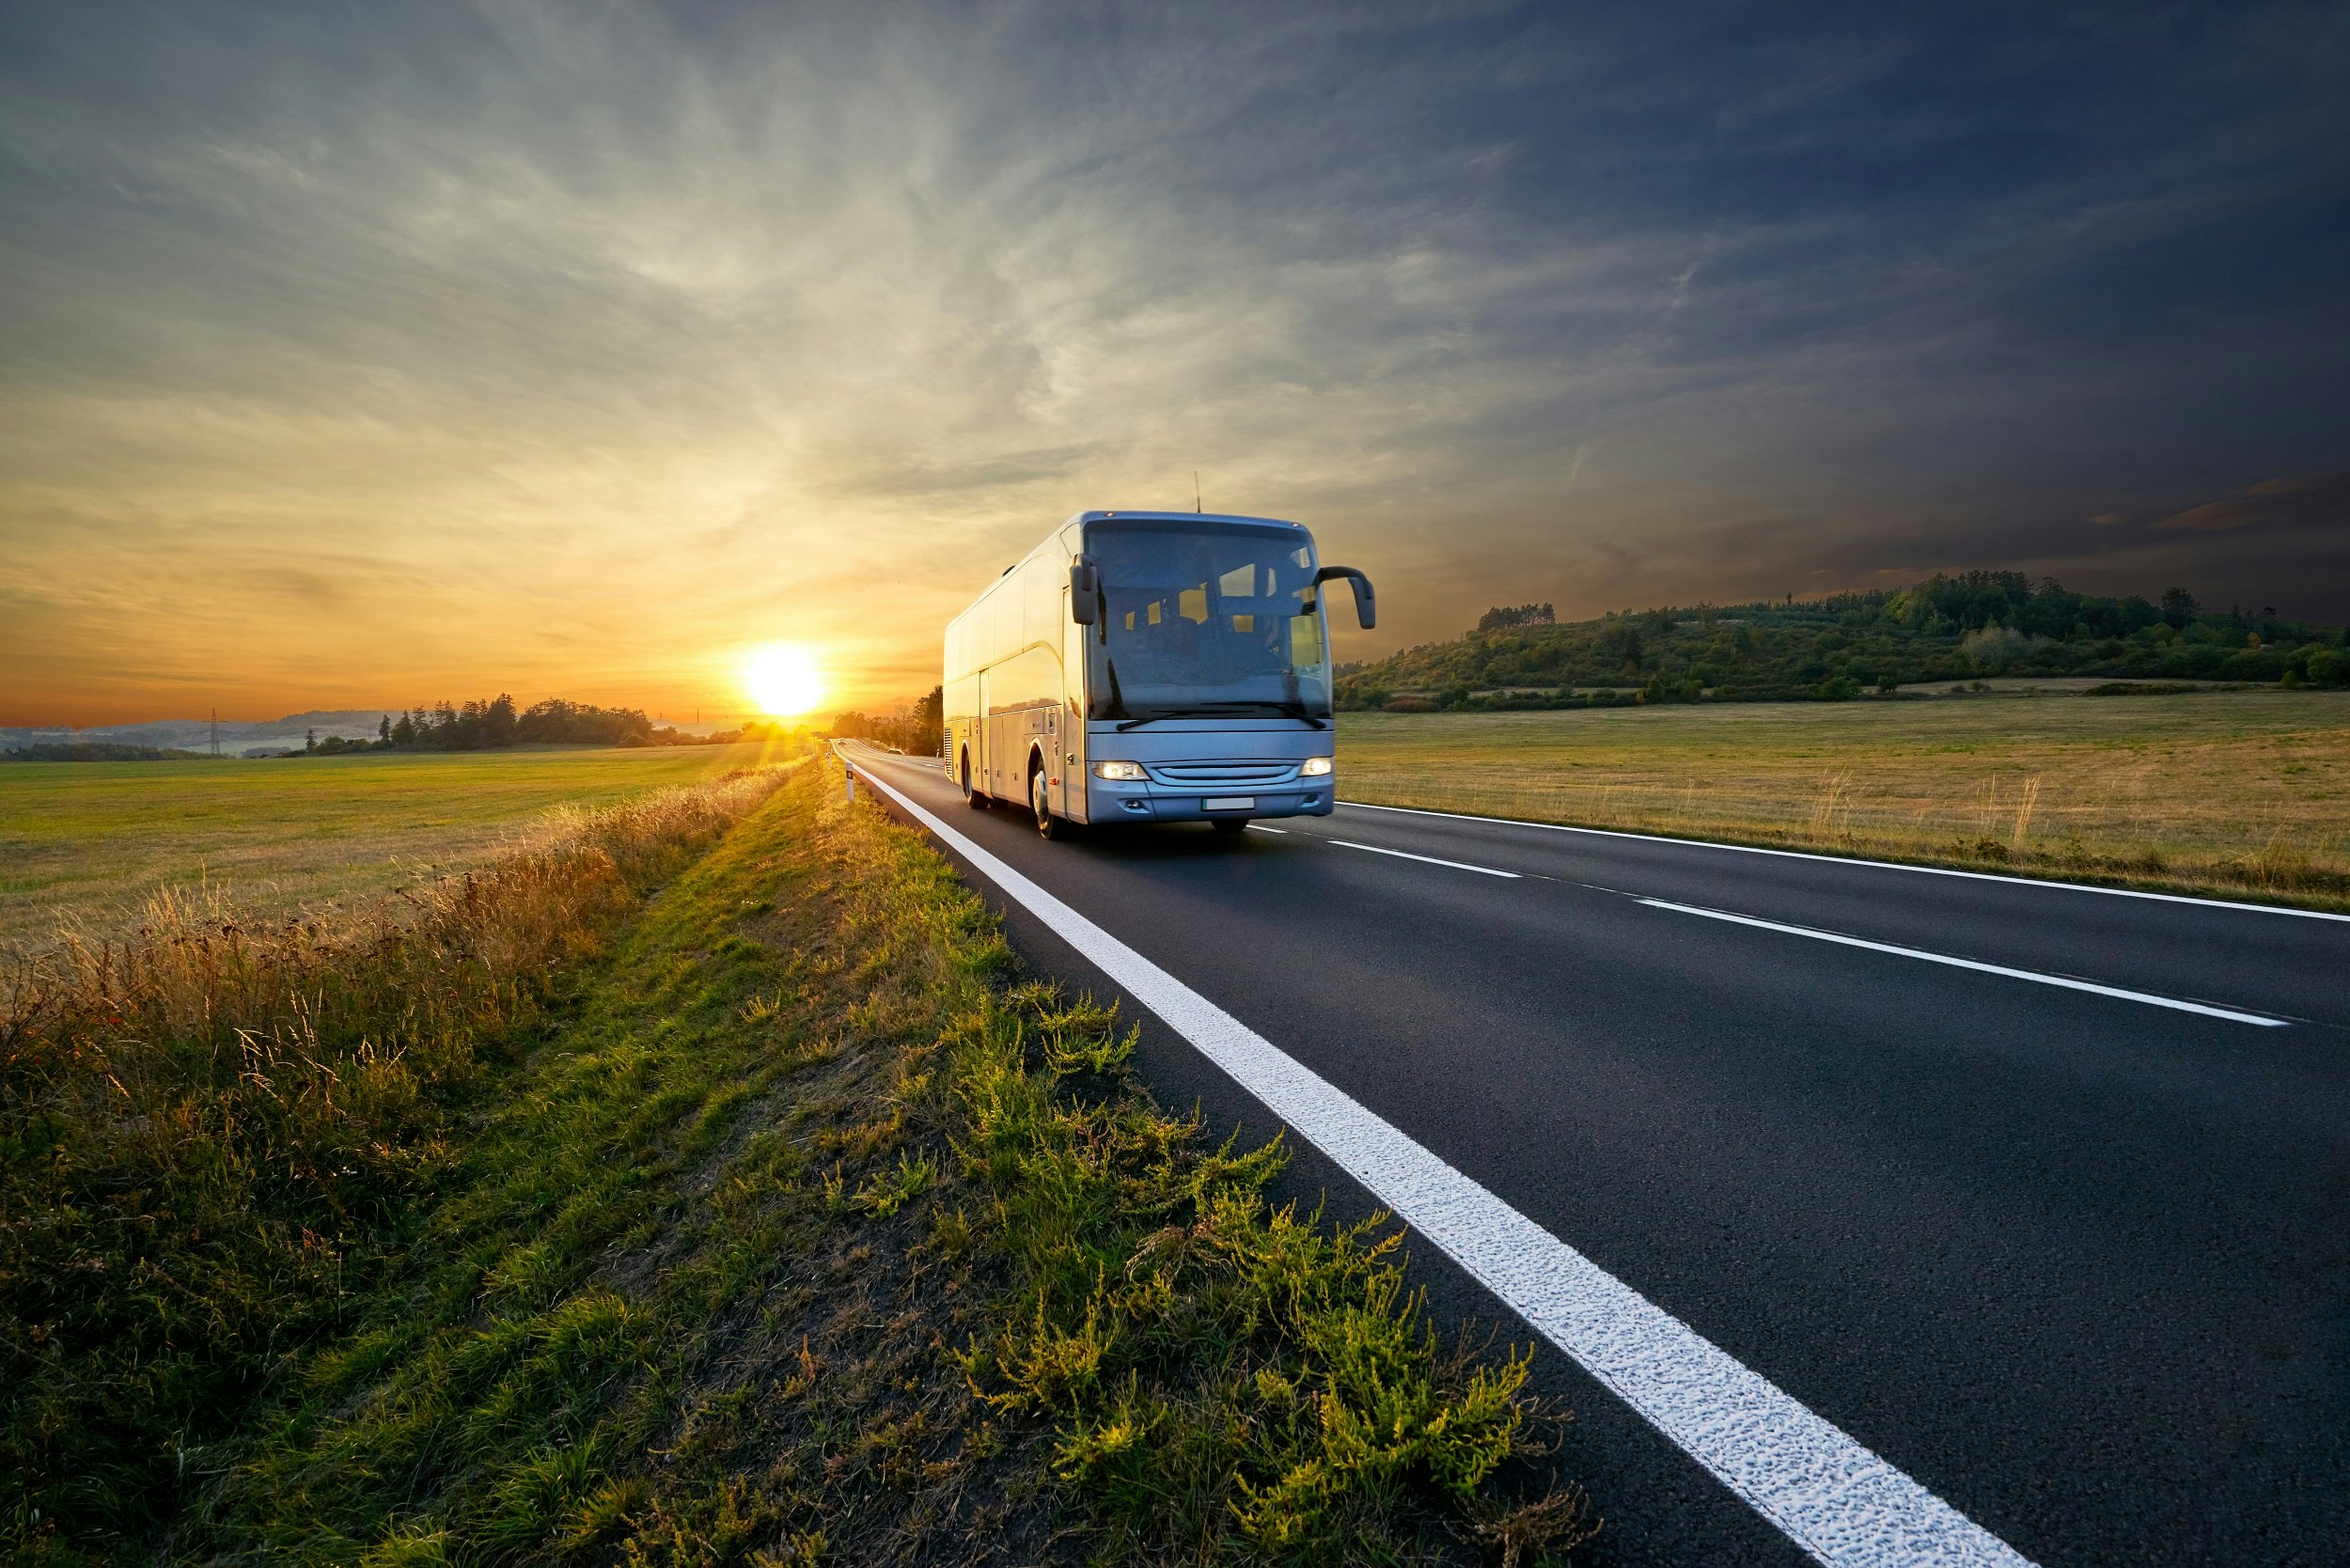 A large coach driving along a road in a rural region with the sun setting in the background